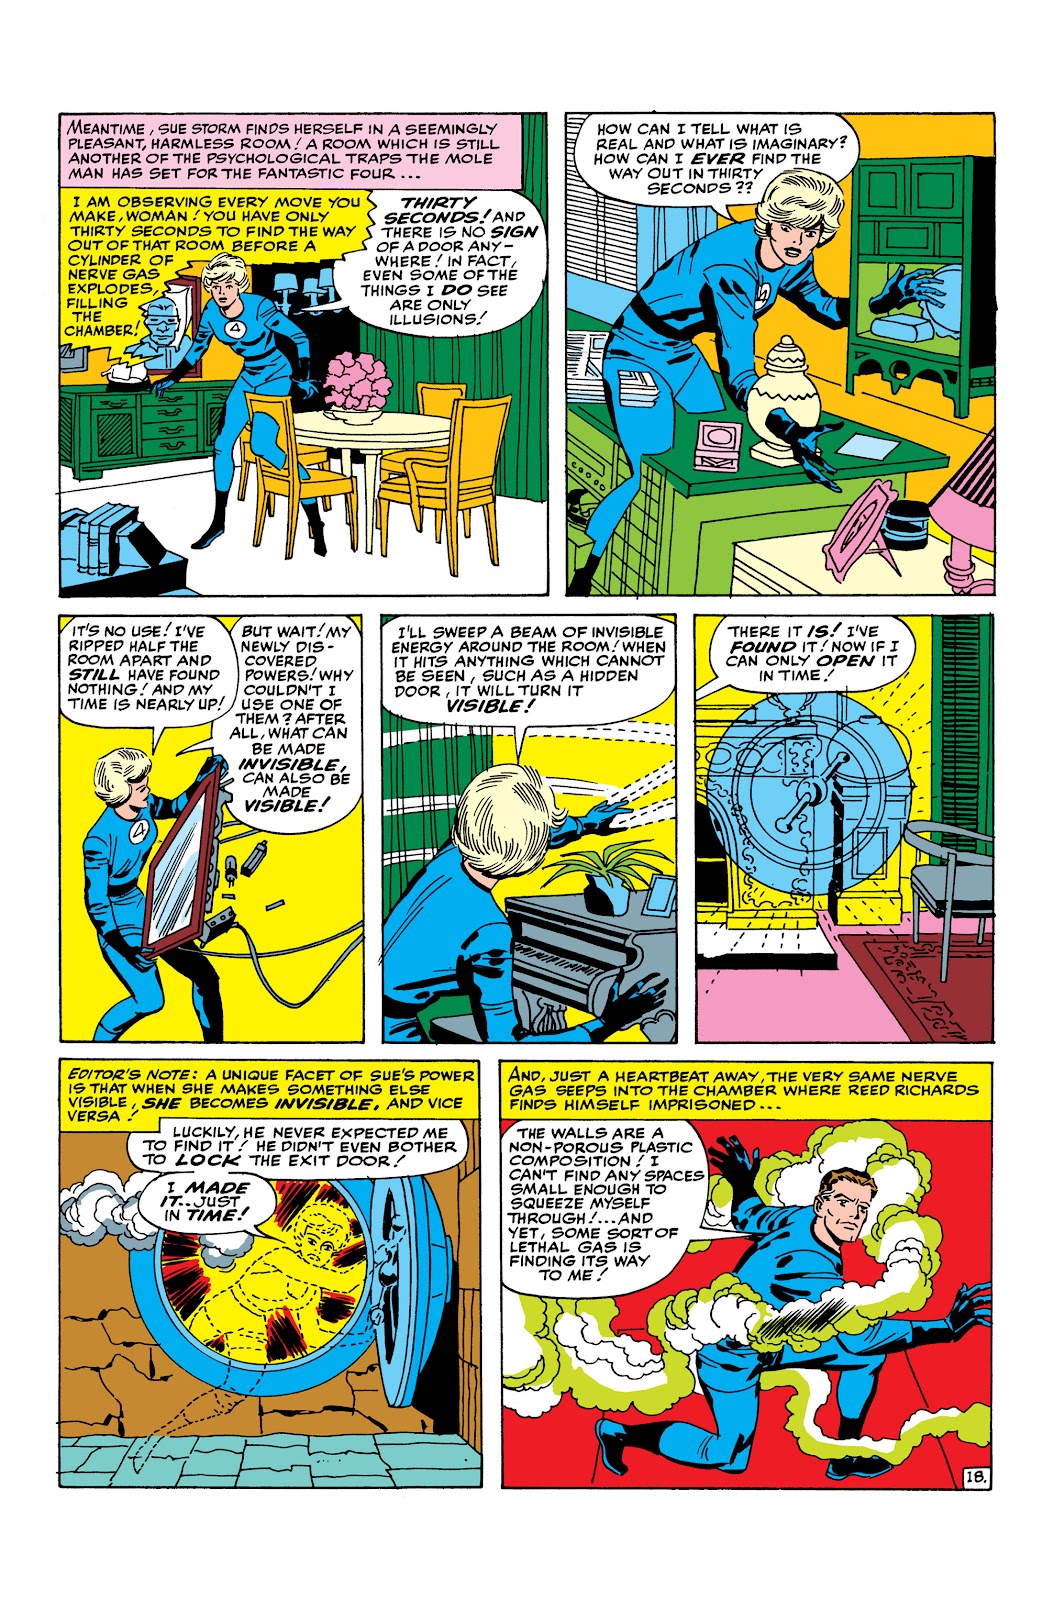 Read online Marvel Masterworks: The Fantastic Four comic - Issue # TPB 3 (Part 1) - 44